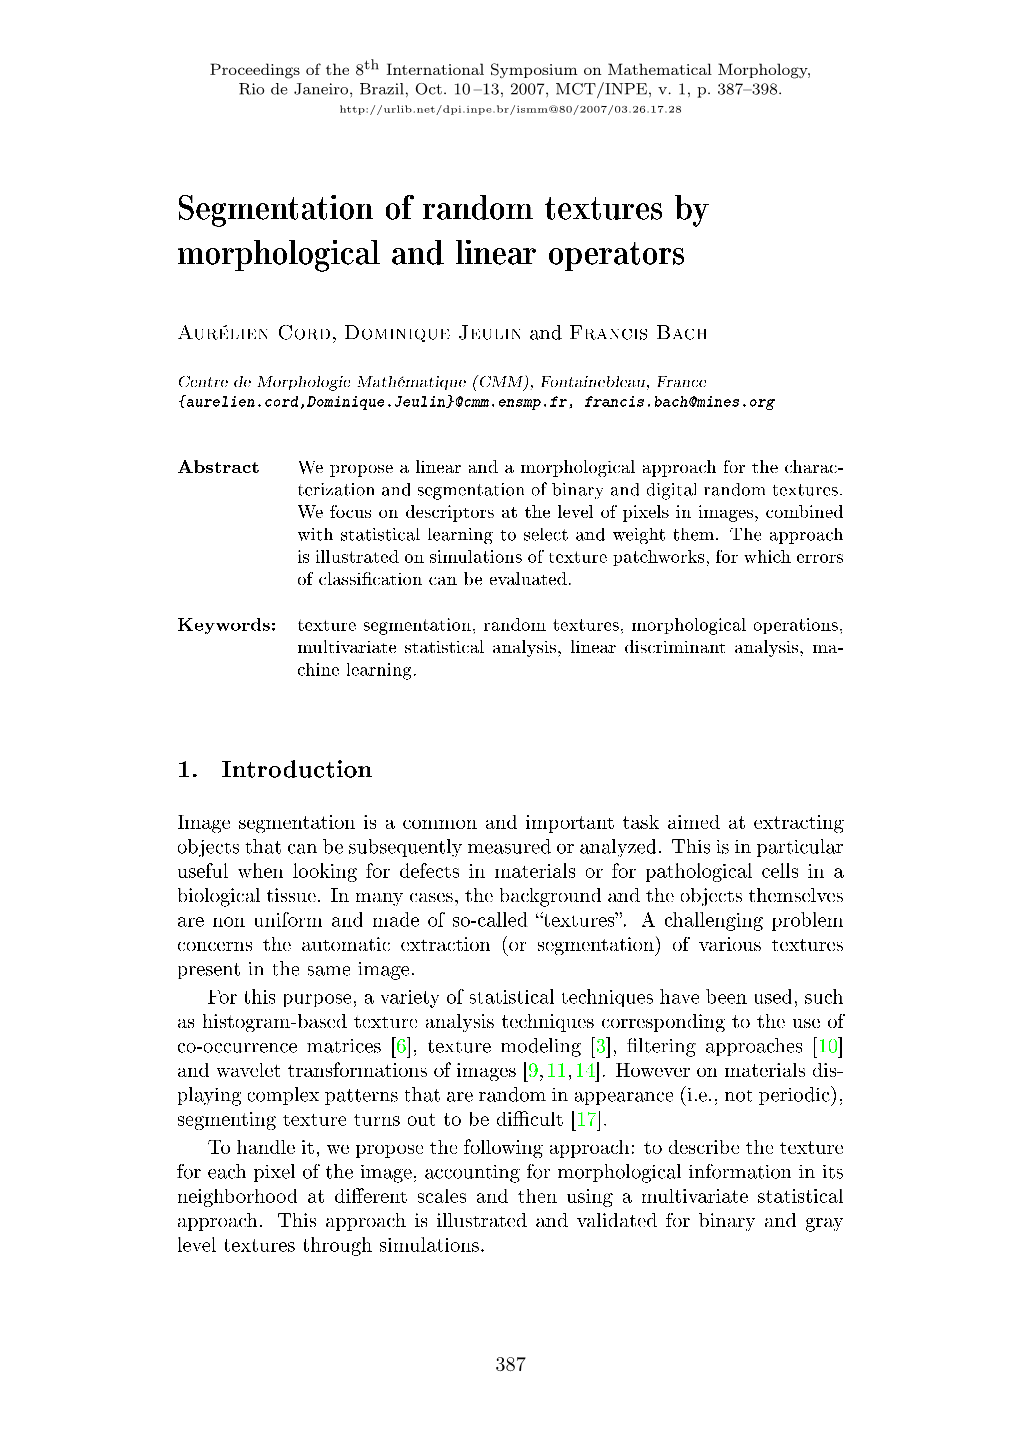 Segmentation of Random Textures by Morphological and Linear Operators